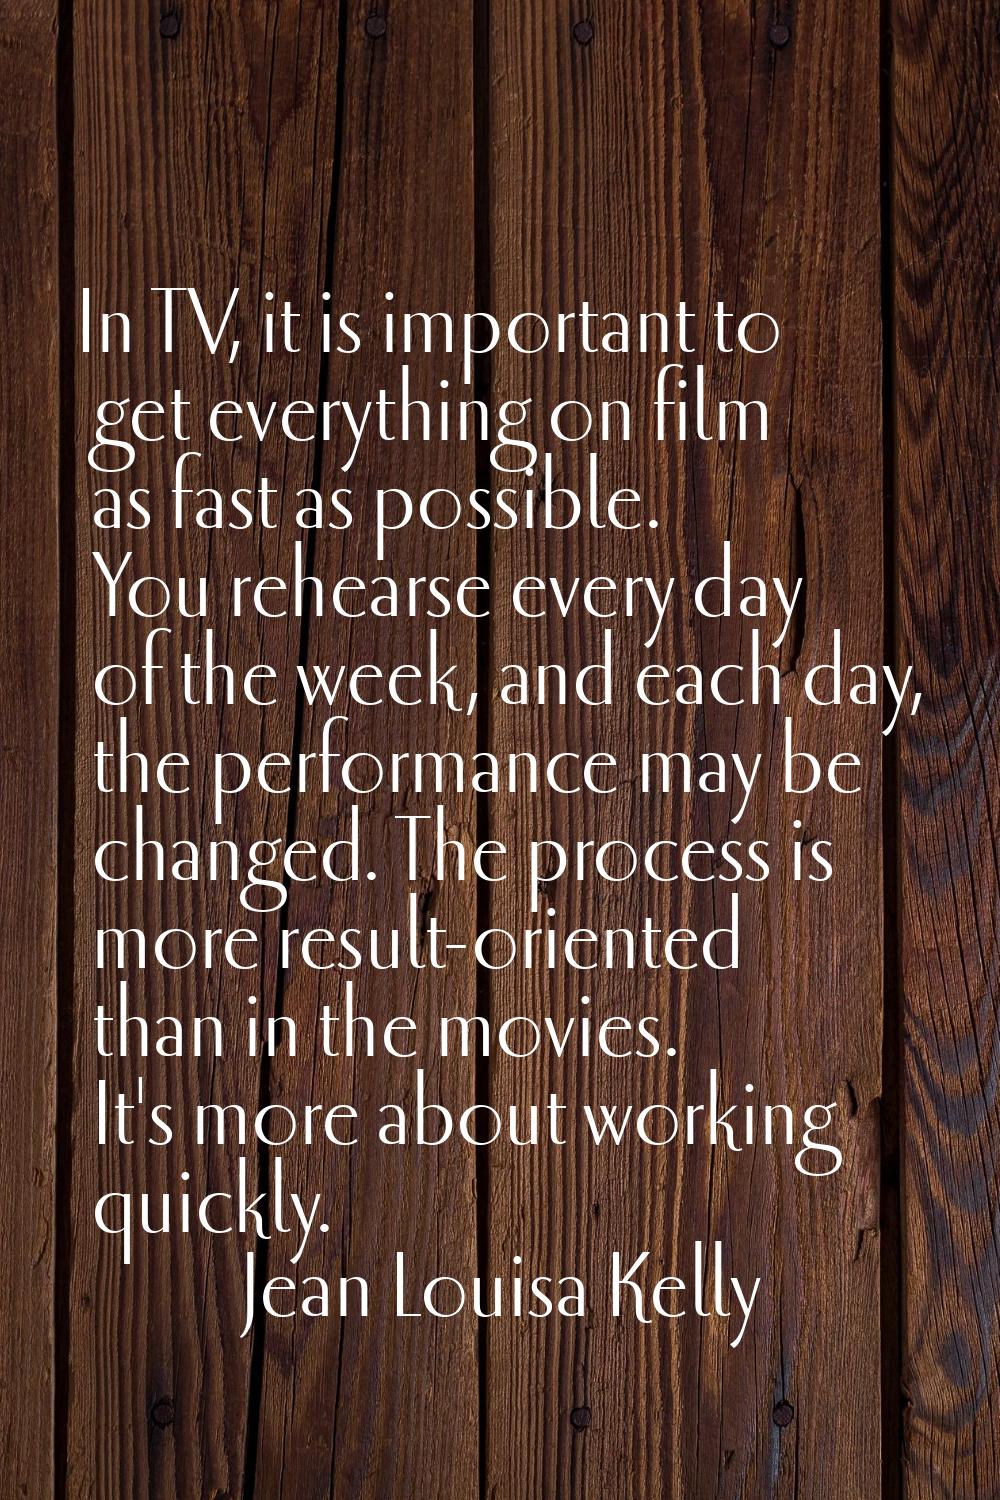 In TV, it is important to get everything on film as fast as possible. You rehearse every day of the